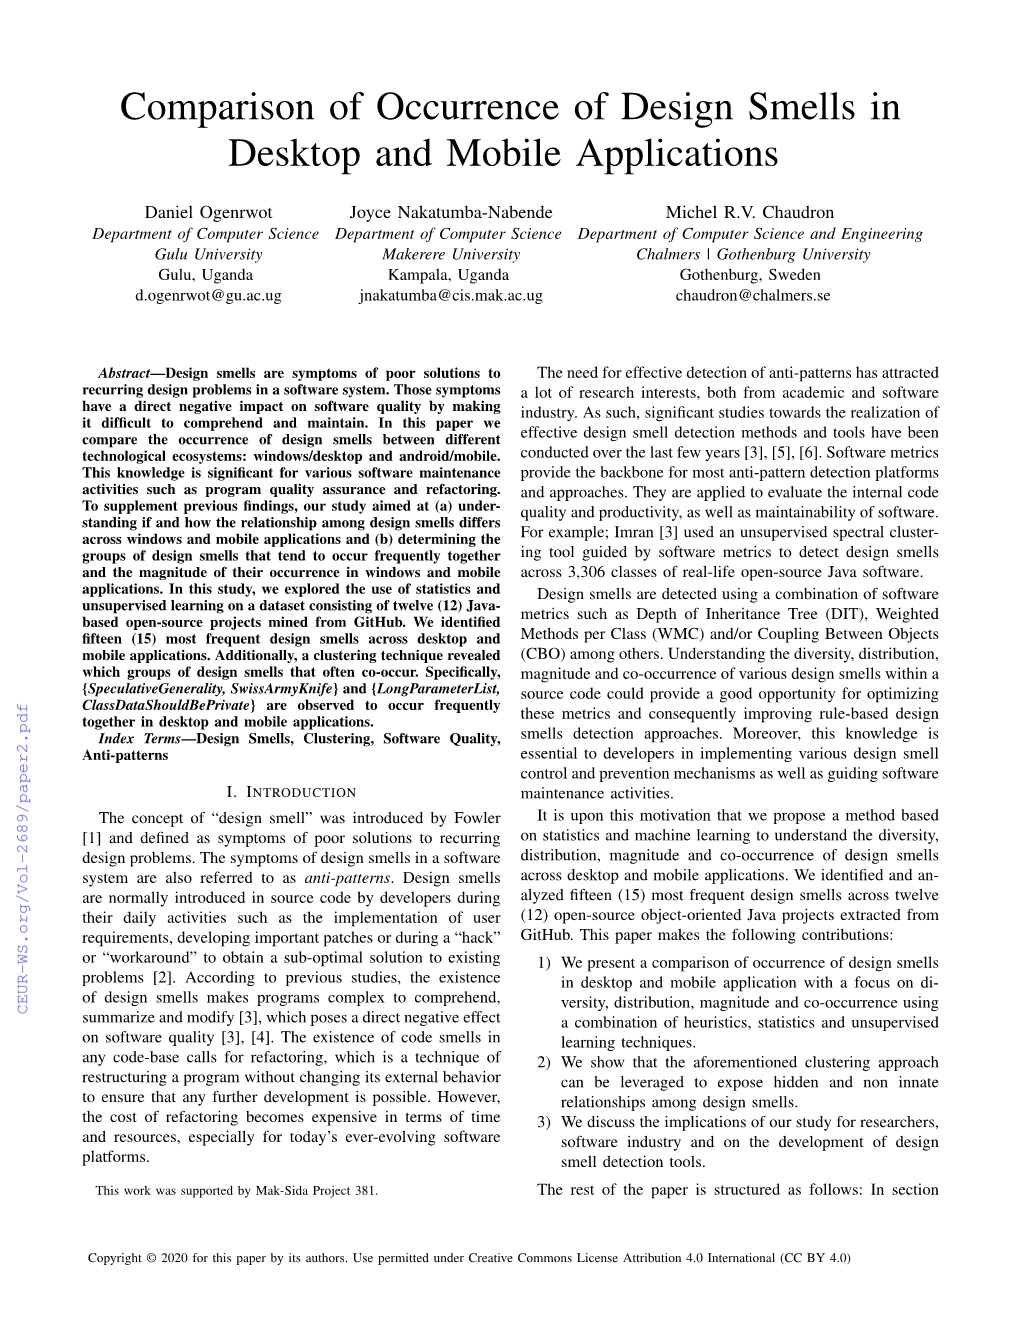 Comparison of Occurrence of Design Smells in Desktop and Mobile Applications